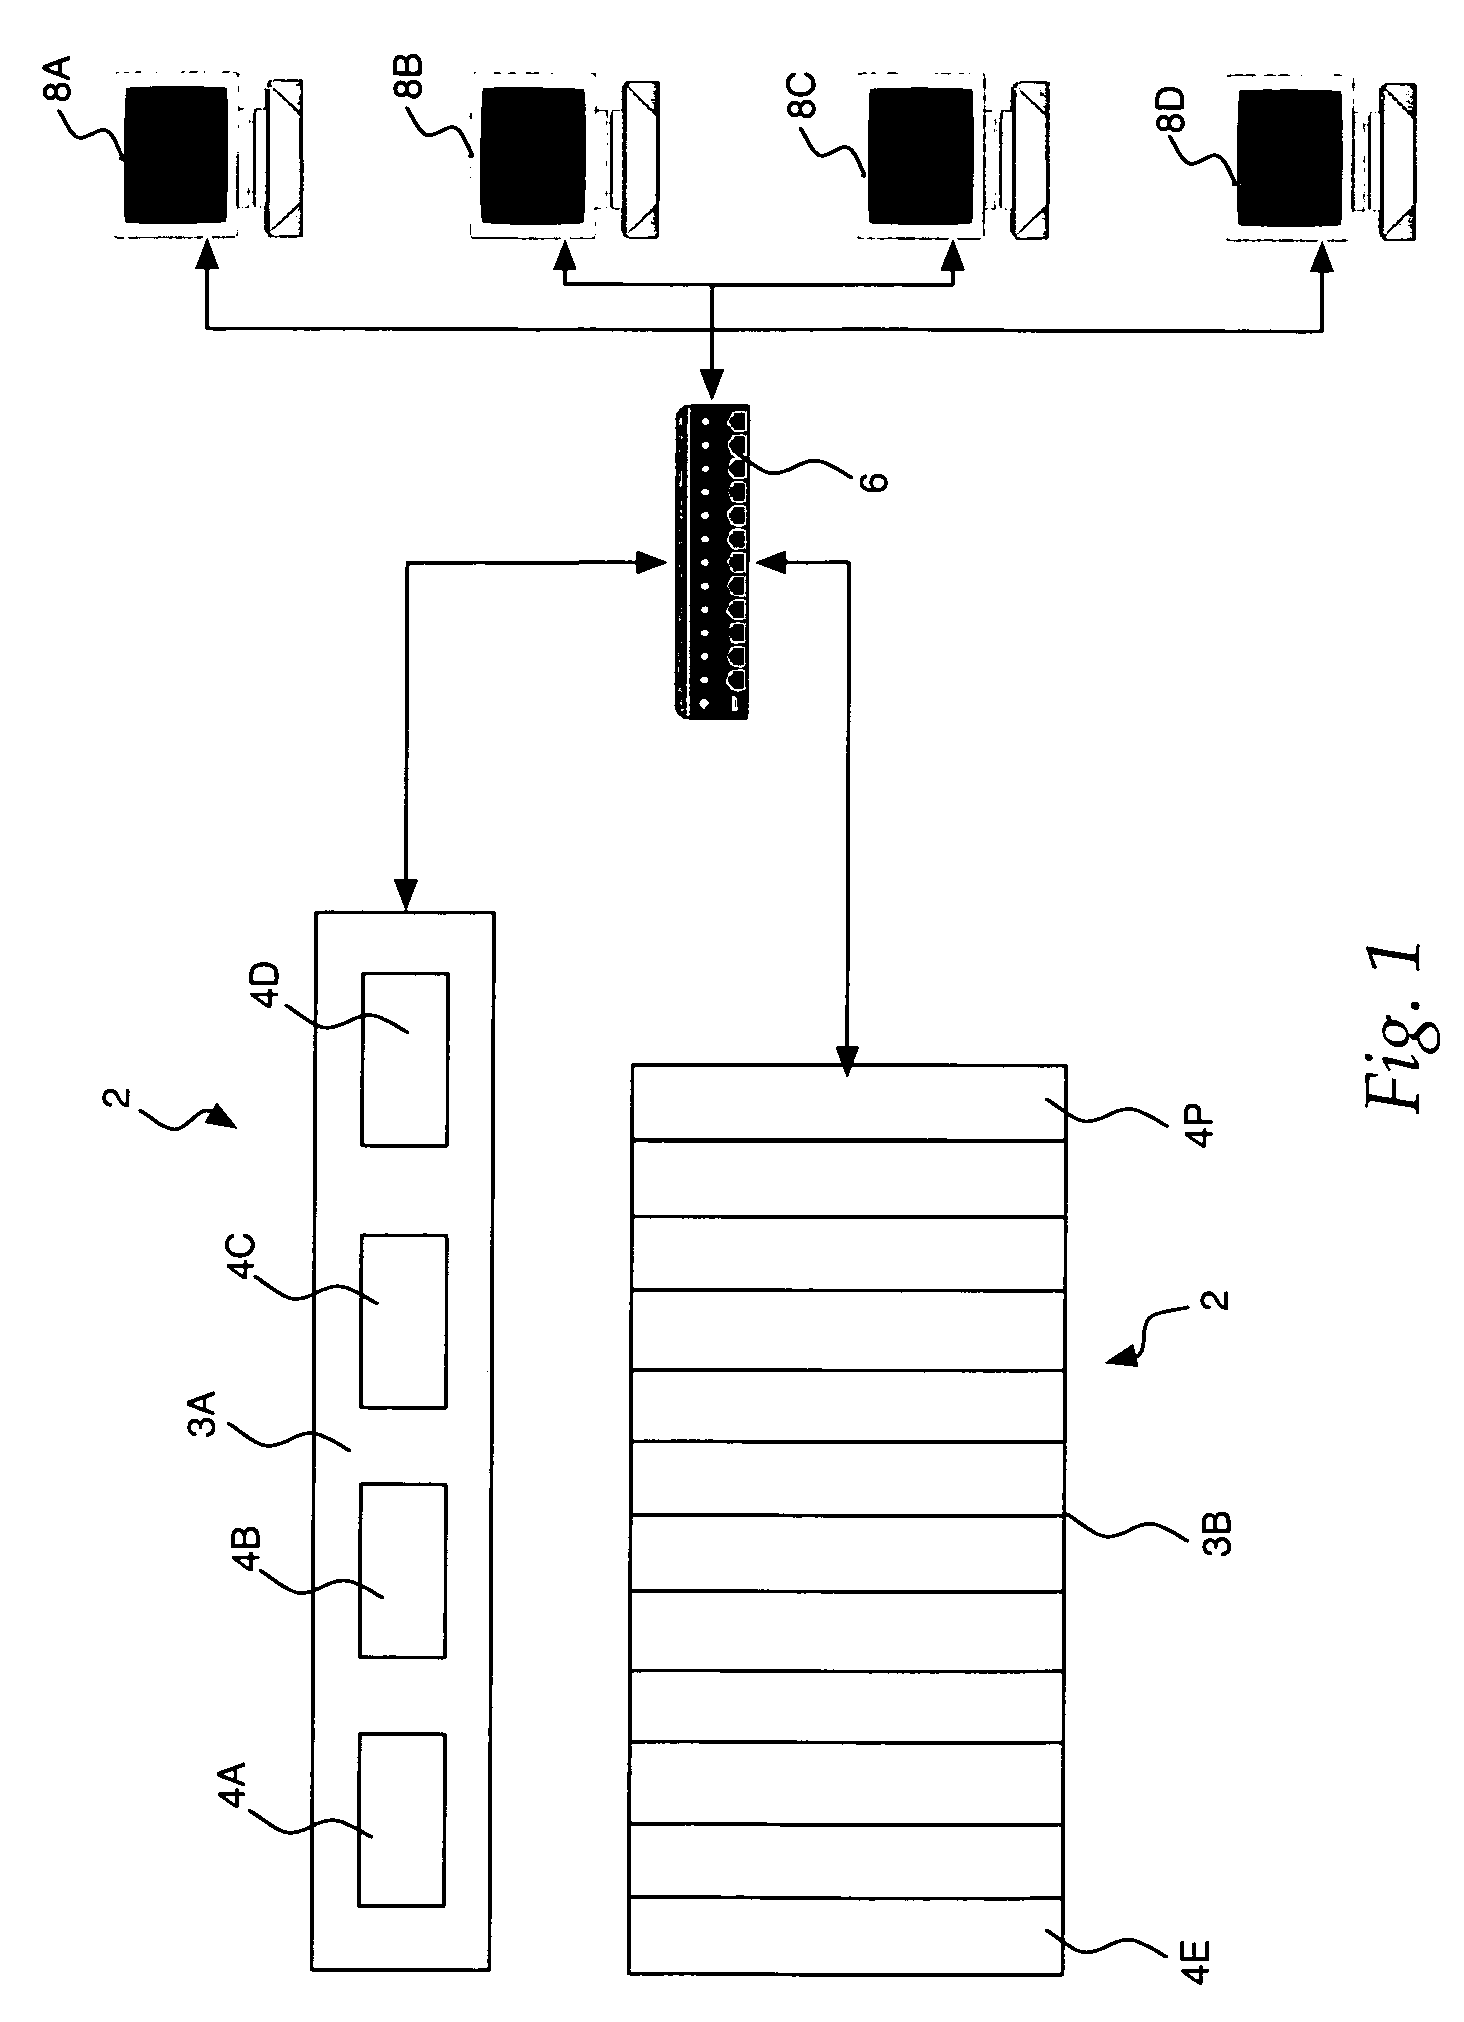 Method, system, apparatus, and computer-readable medium for locking and synchronizing input/output operations in a data storage system